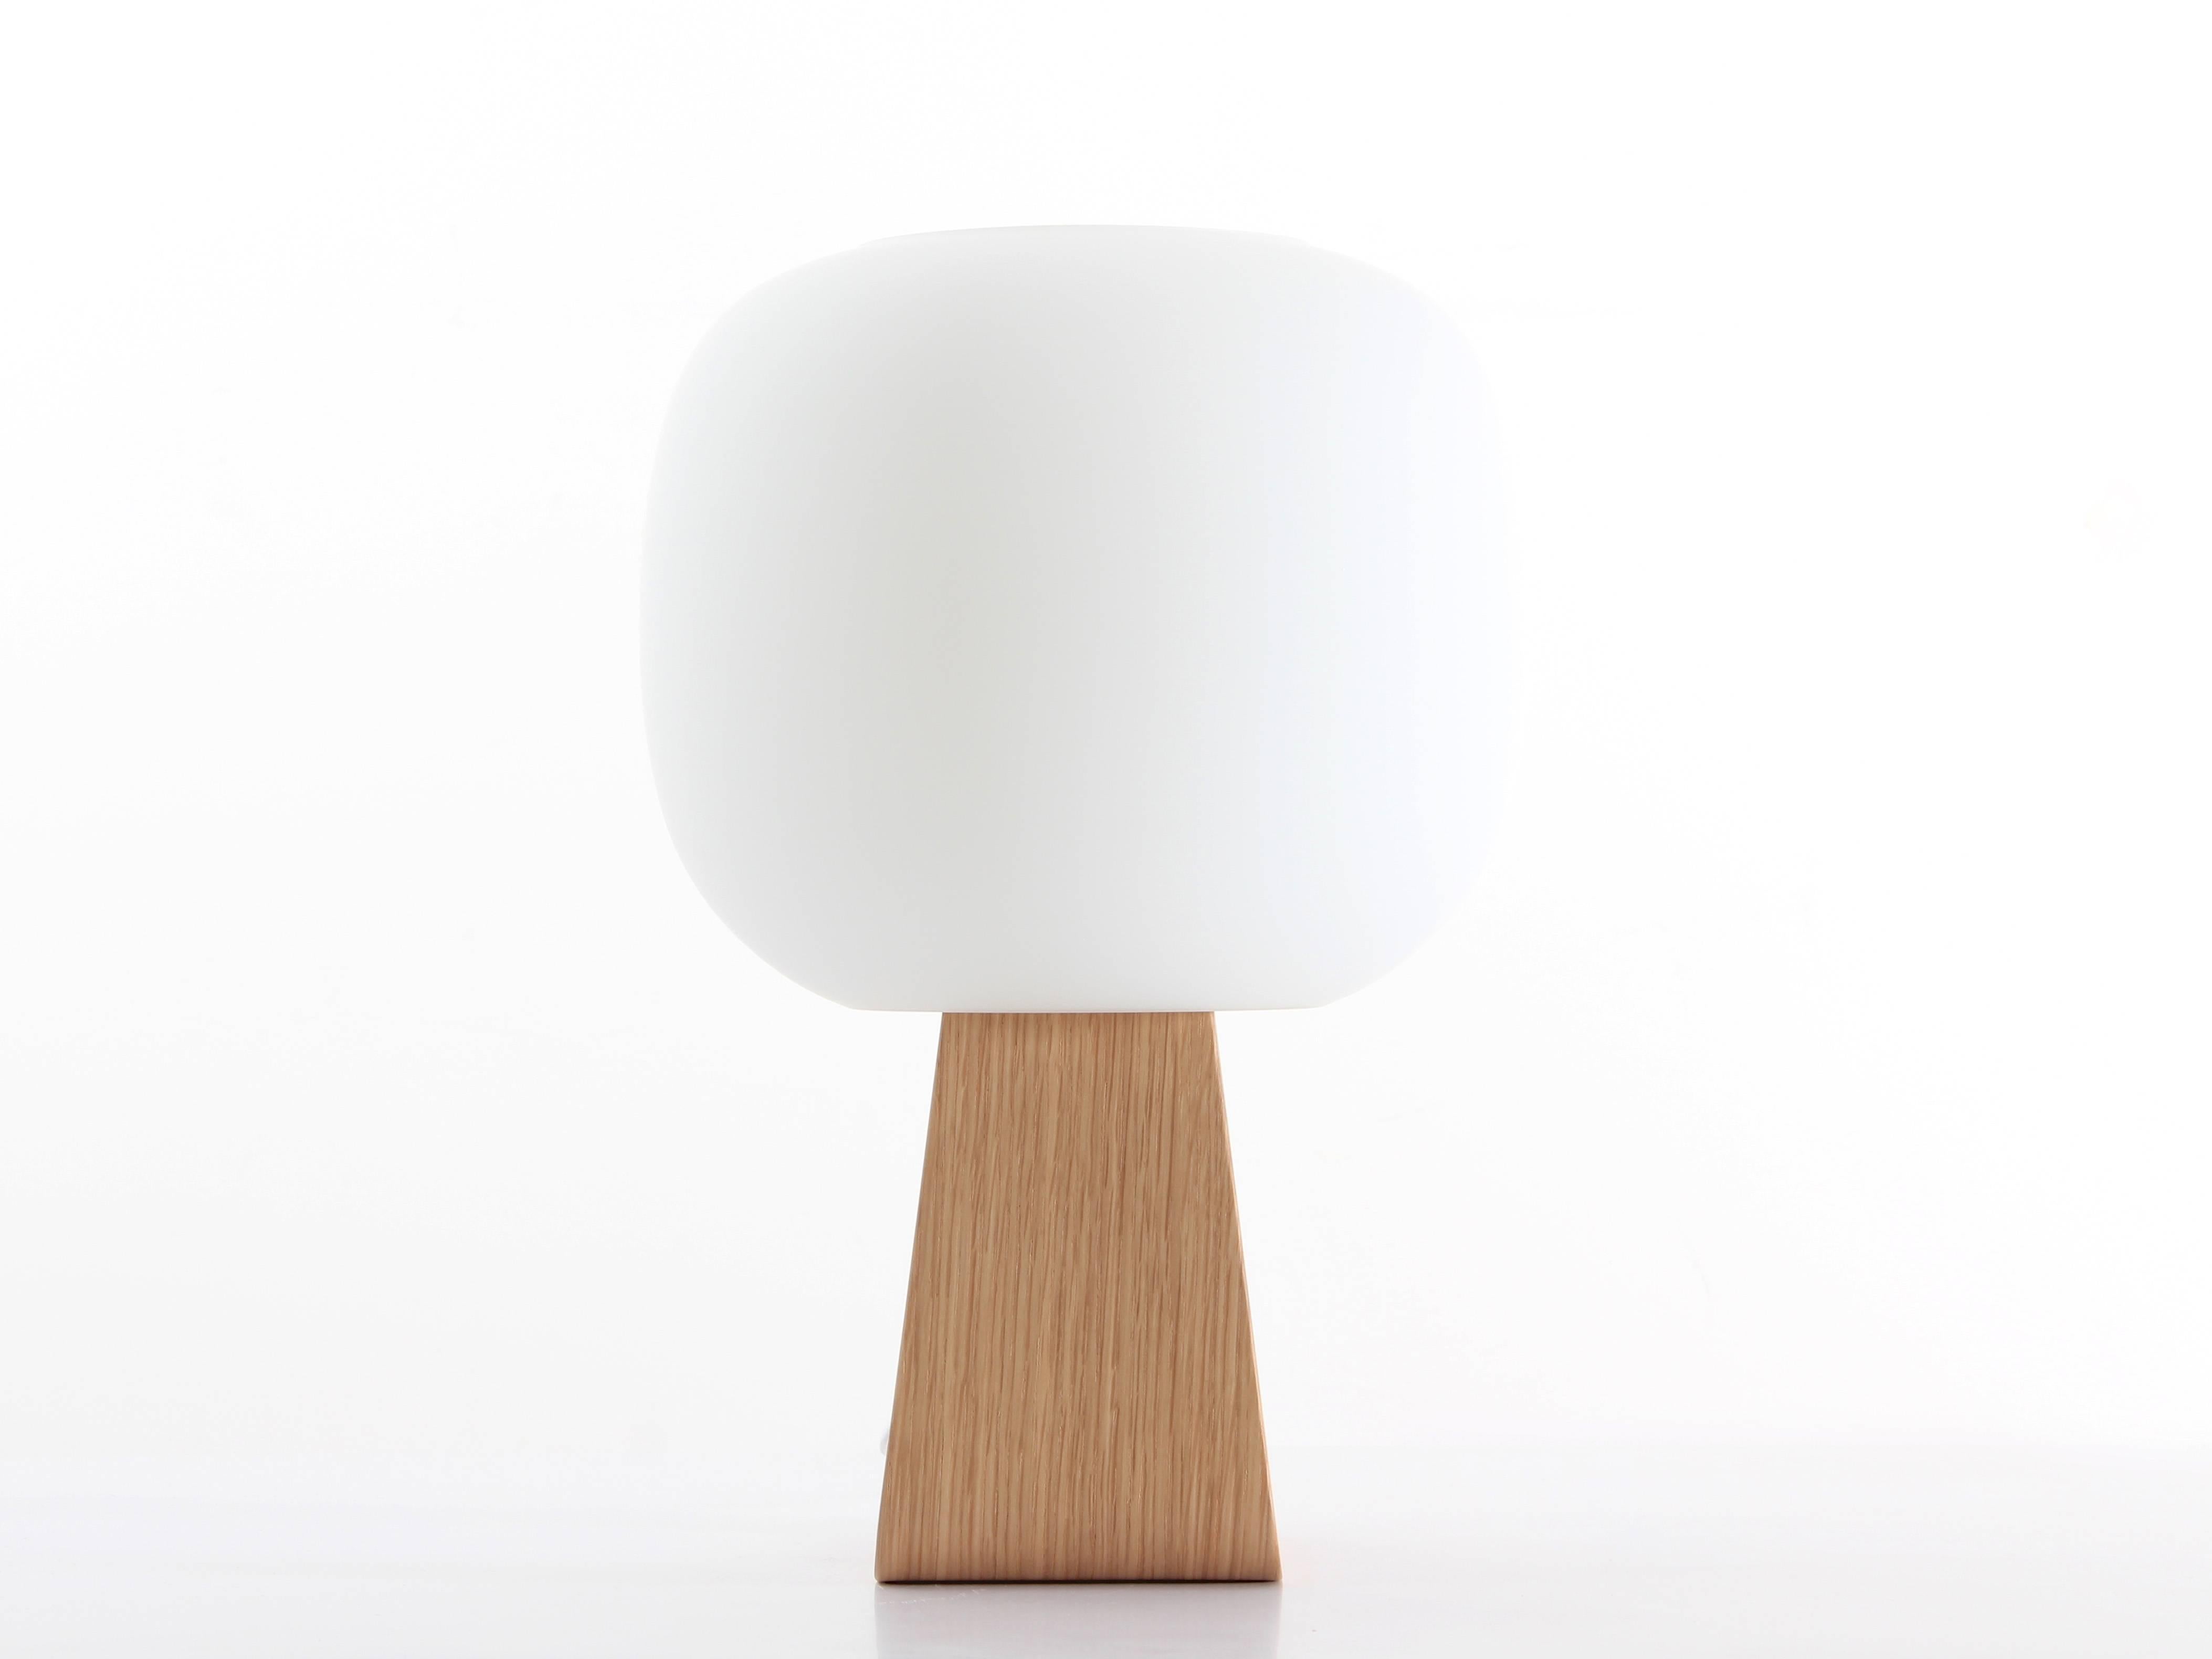 Scandinavian small table lamp poplar plywood and oak Toad model for Timo Niskanen Himmee. comtempotraine design. New product. Works with E14 bulbs.

Timo Niskanen is a young designer of the finnish avant-garde, the Møbler Gallery met in Stockholm.